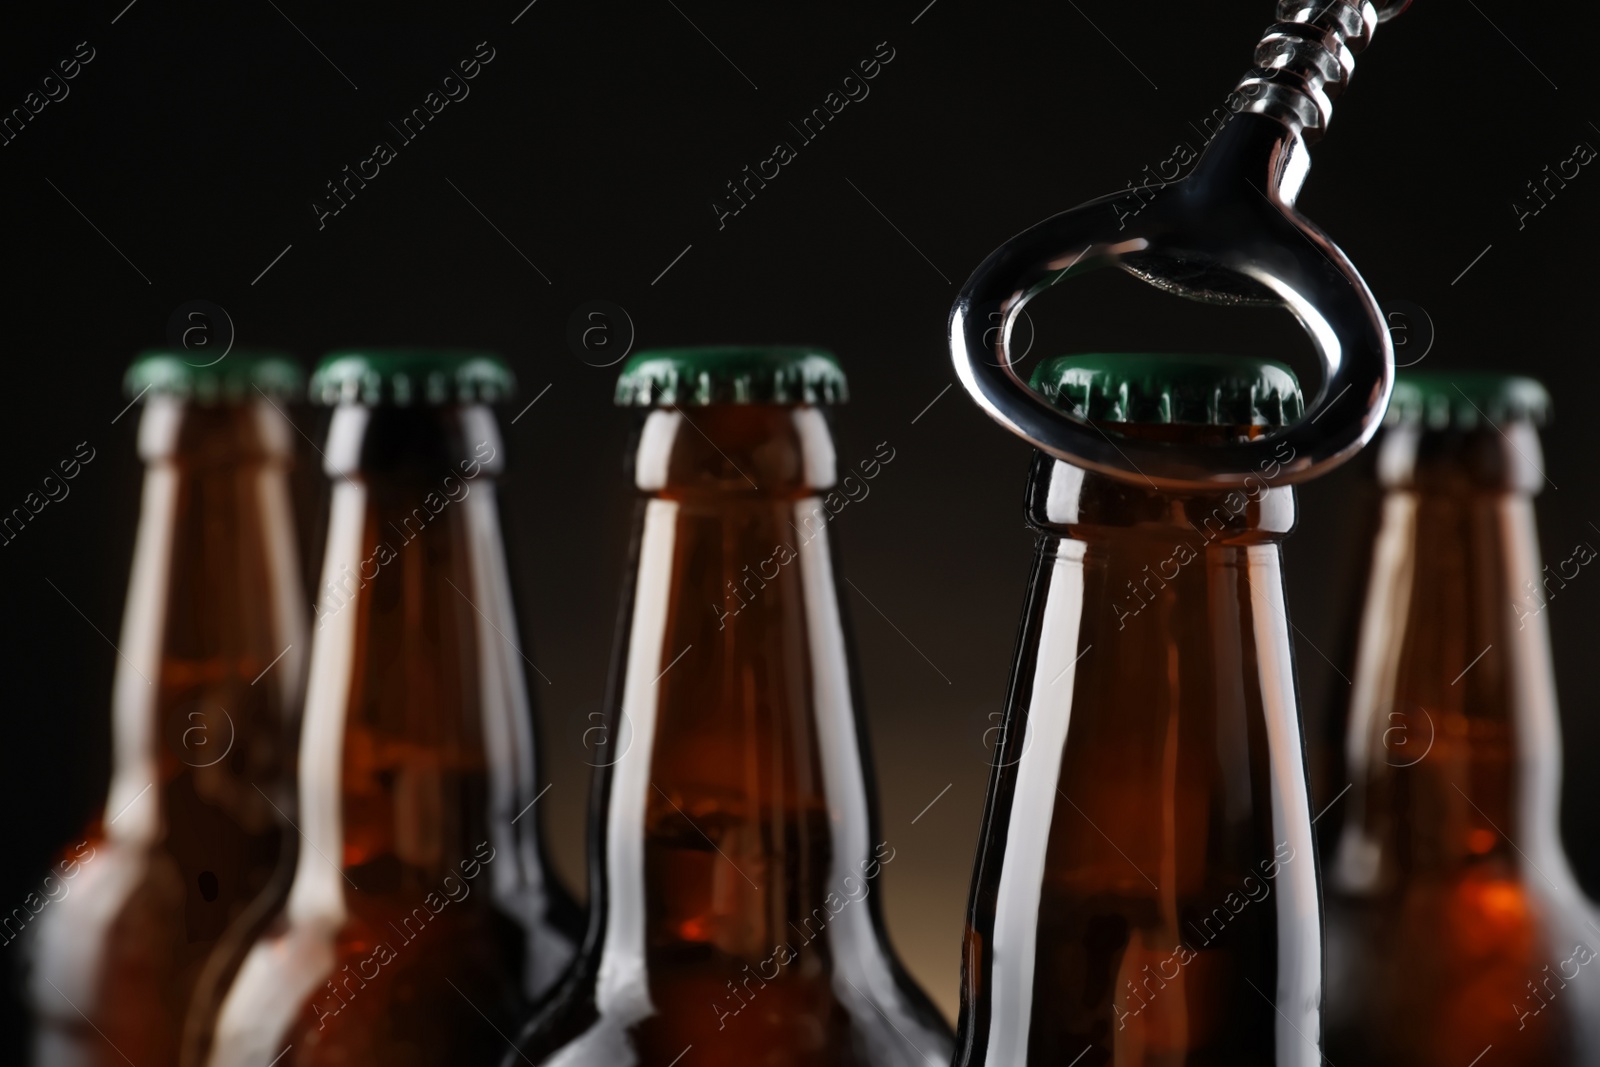 Photo of Opening bottle of beer on dark background, closeup